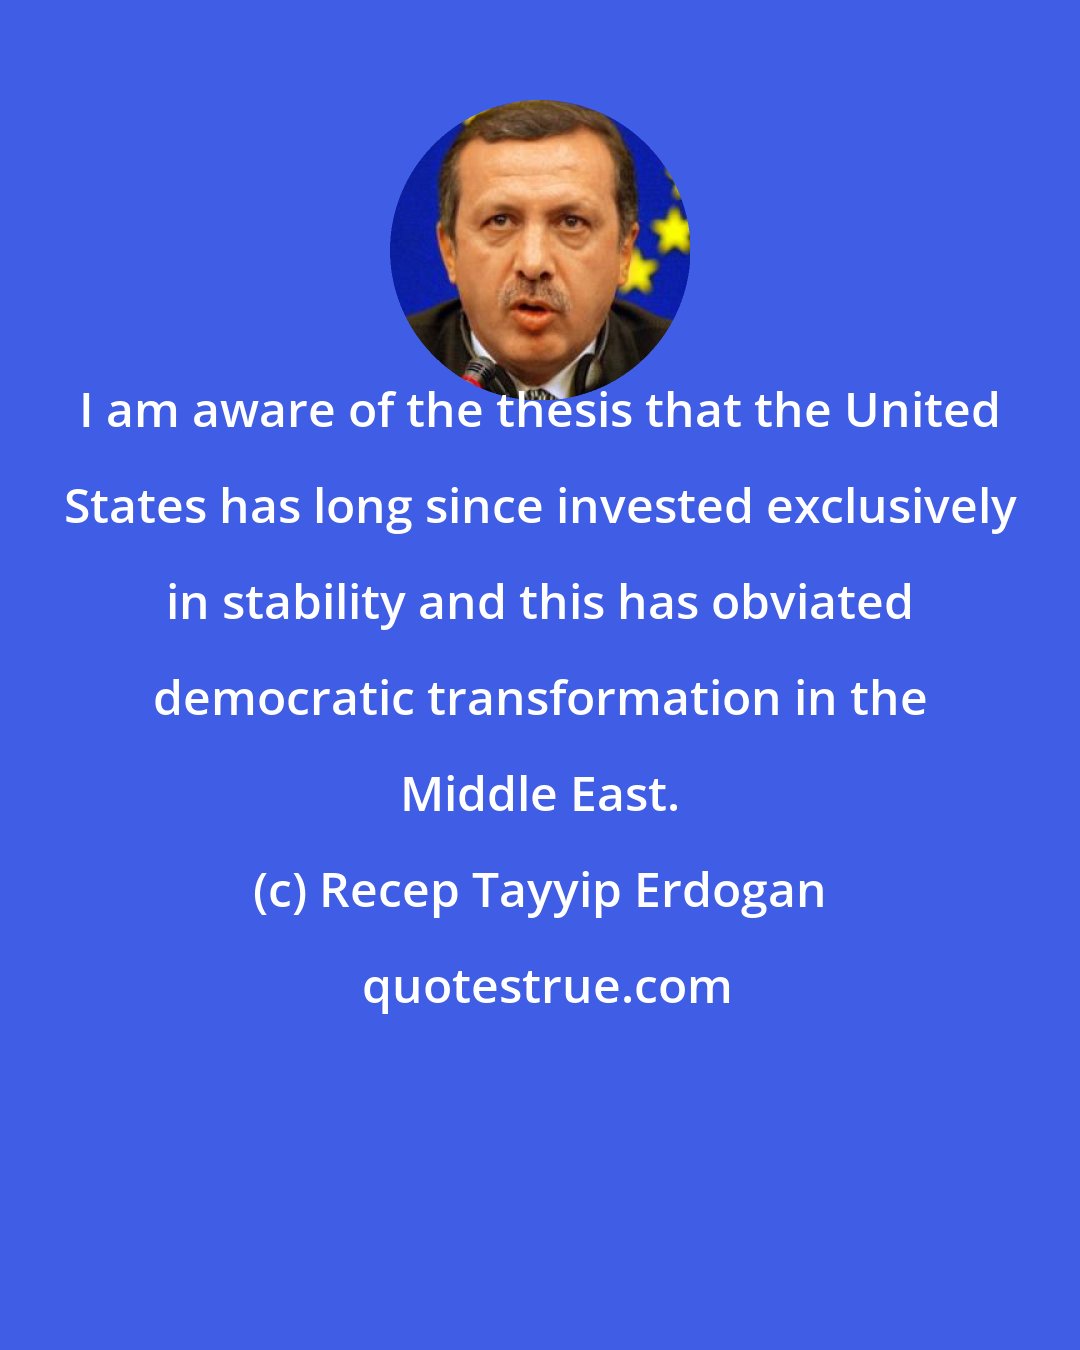 Recep Tayyip Erdogan: I am aware of the thesis that the United States has long since invested exclusively in stability and this has obviated democratic transformation in the Middle East.